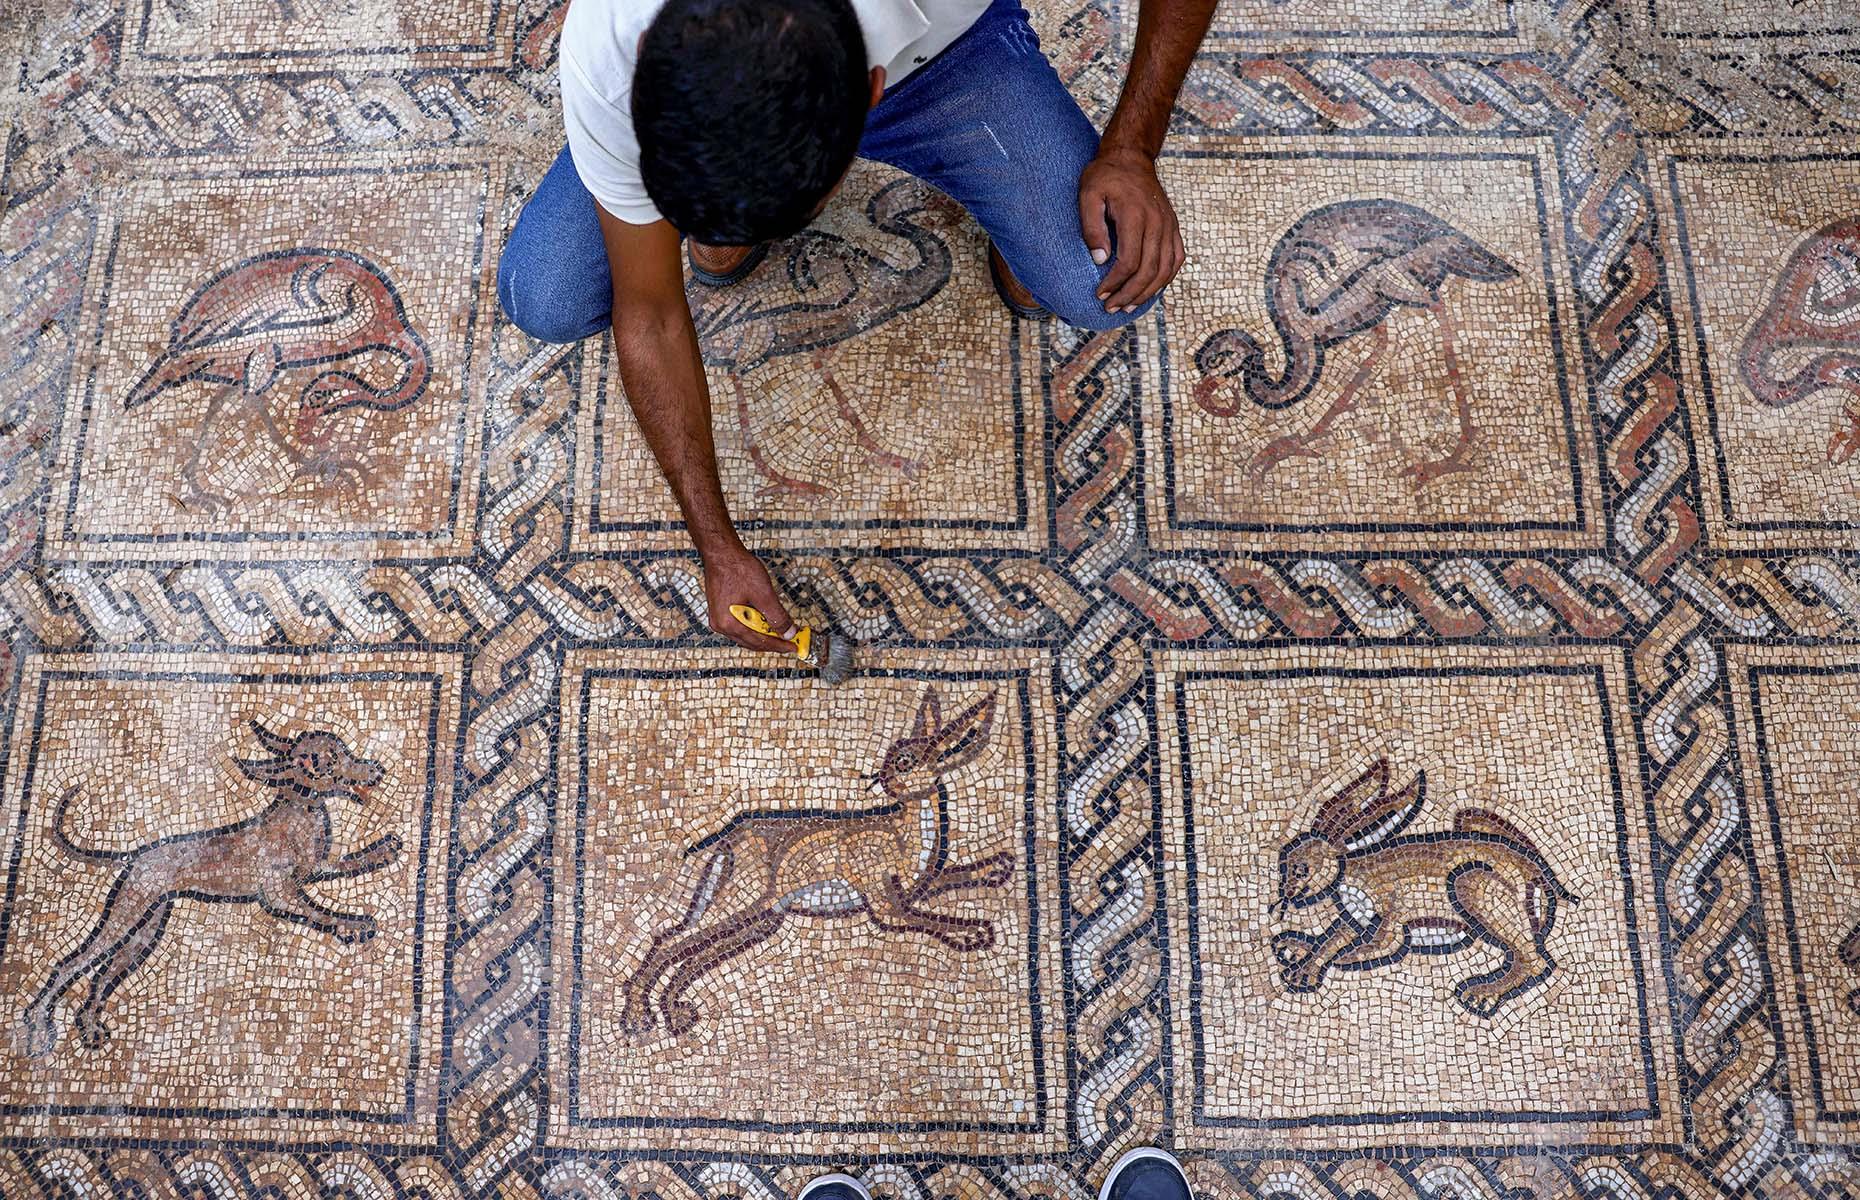 <p>A farmer accidentally uncovered an intact Byzantine floor mosaic after trying to plant new trees in his Gaza orchard. The discovery happened six months ago when Salman al-Nabahin and his son Ahmad tried to figure out why the olive trees weren't taking root. While digging, Ahmad's axe hit something hard, and the pair realised it was an ornate mosaic, said to date from the fifth to the seventh century AD, depicting birds and other animals. The Palestinian Ministry of Tourism and Antiquities said: "The archaeological discovery is still in its early stages and we await to know more of the secrets and civilisation values."</p>